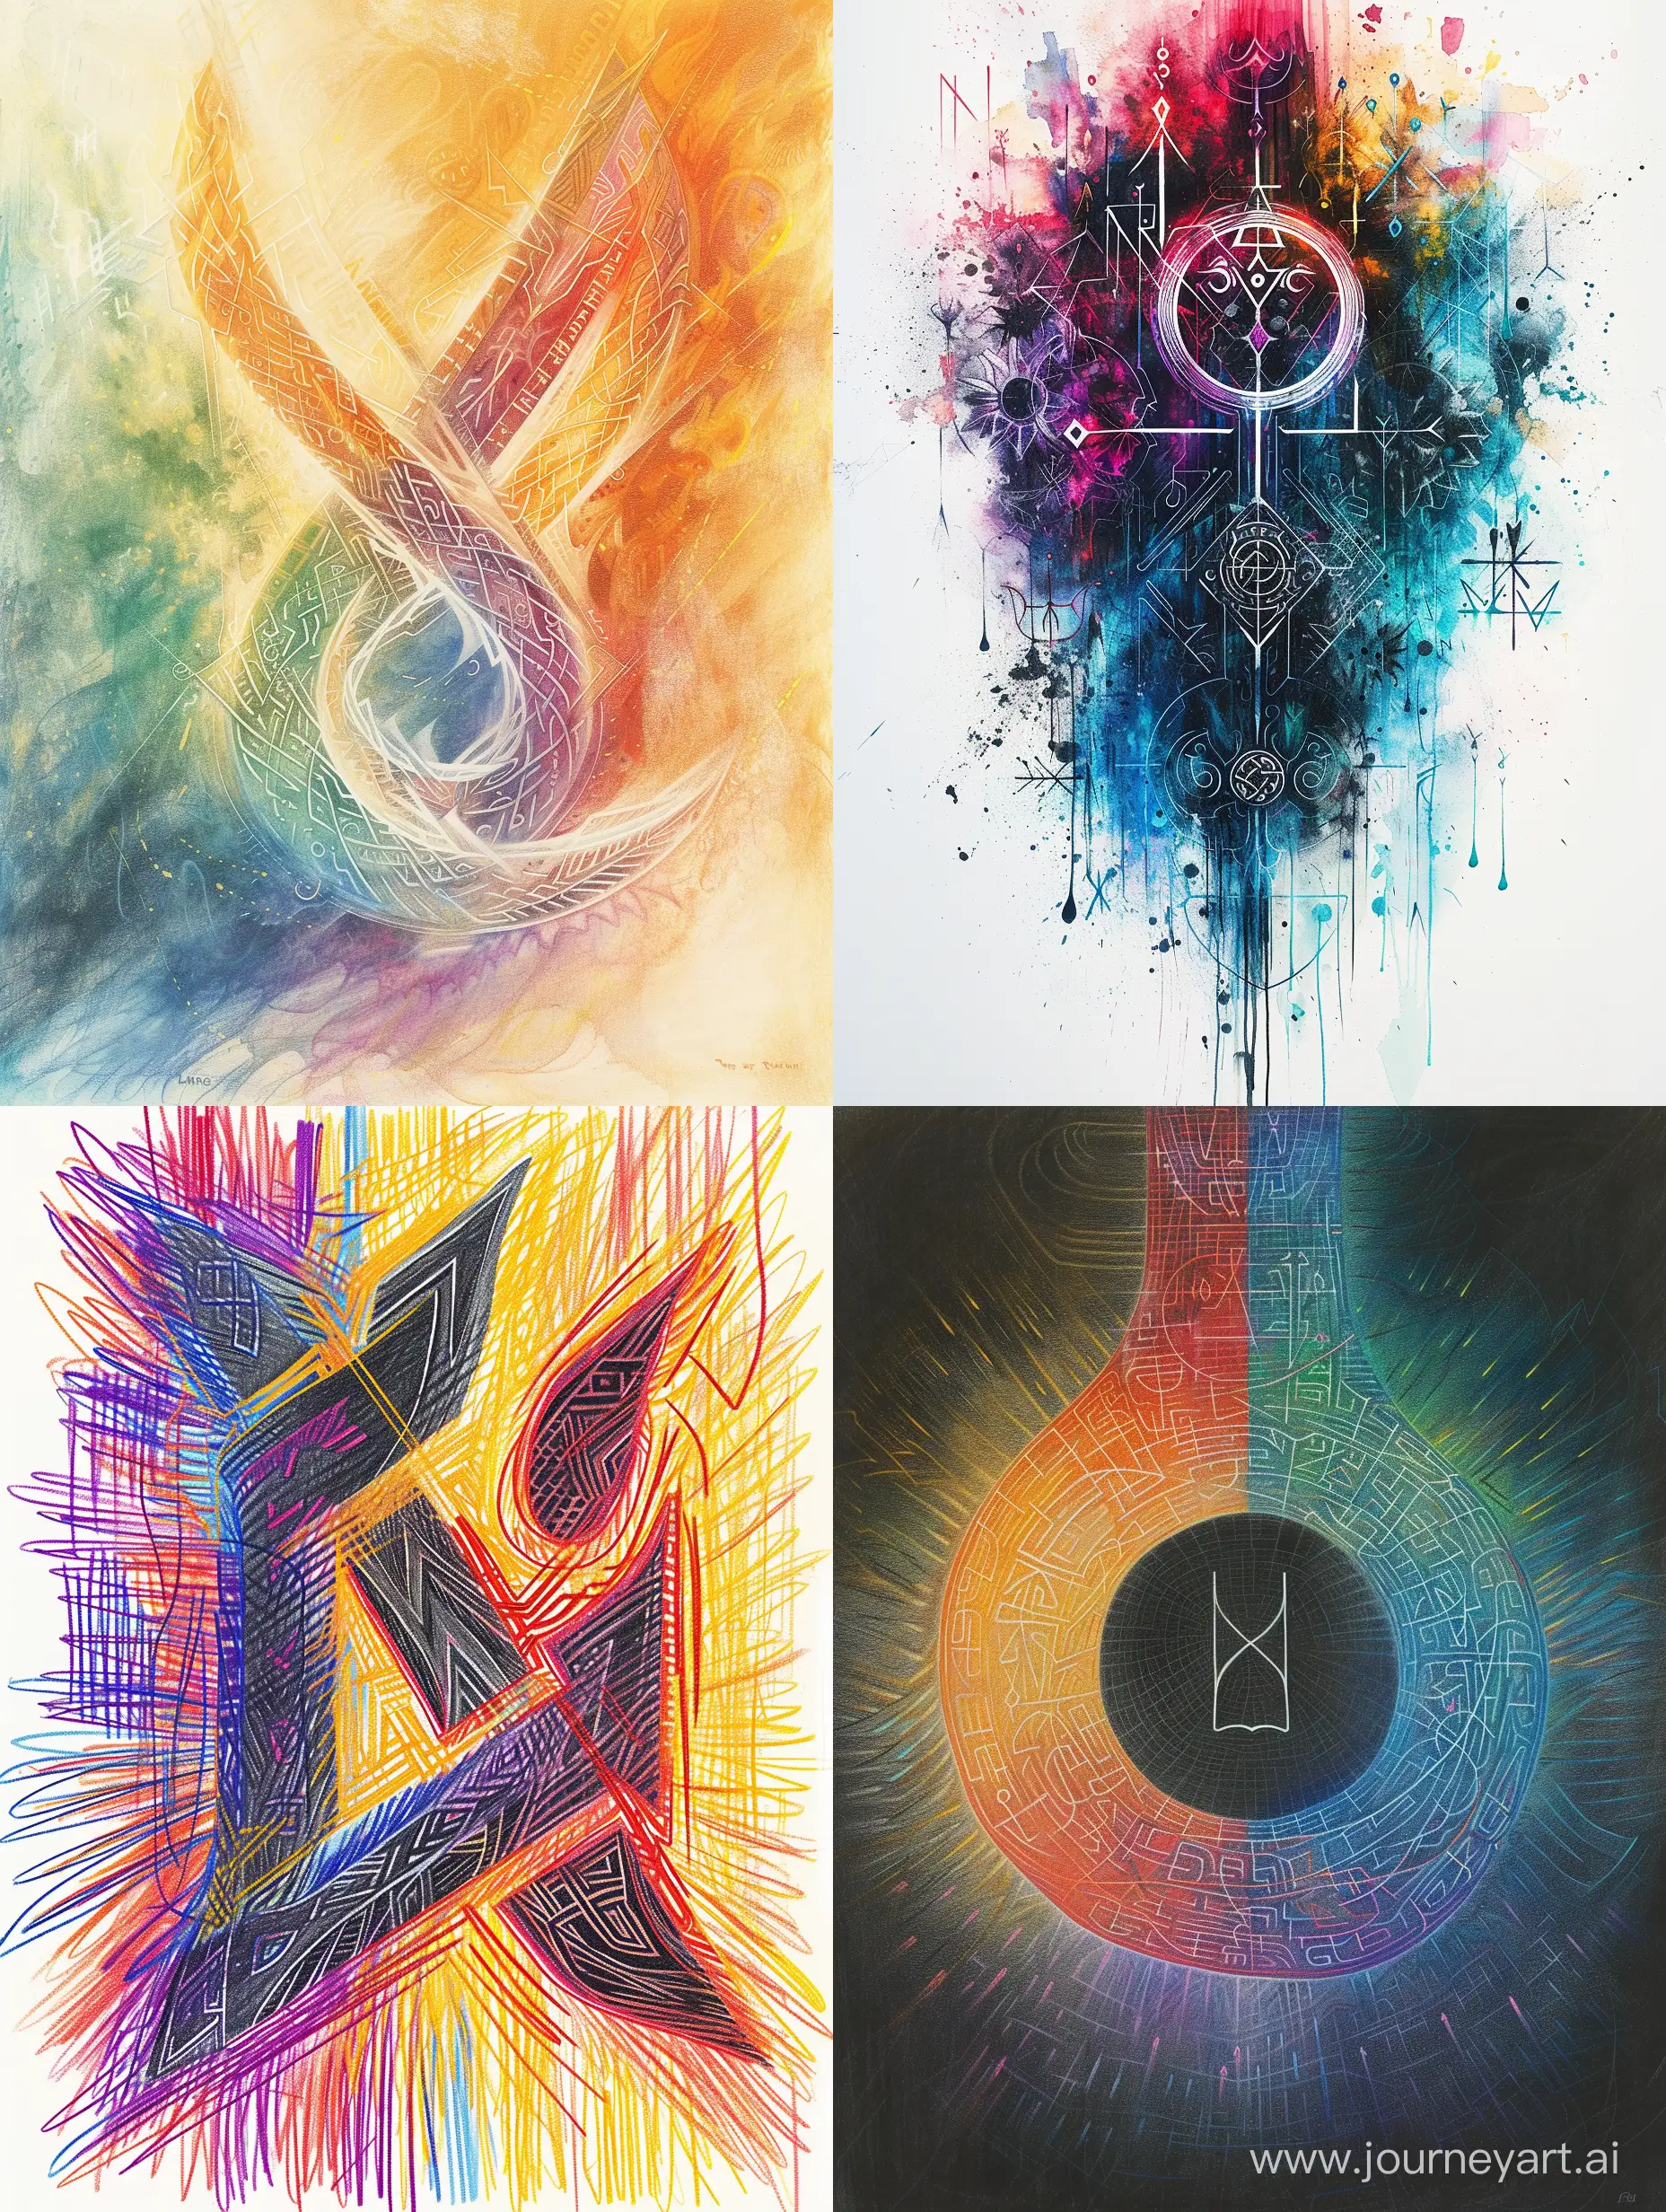 Enchanting-Soulu-Rune-A-Vivid-Depiction-of-Powerful-Abstract-Realities